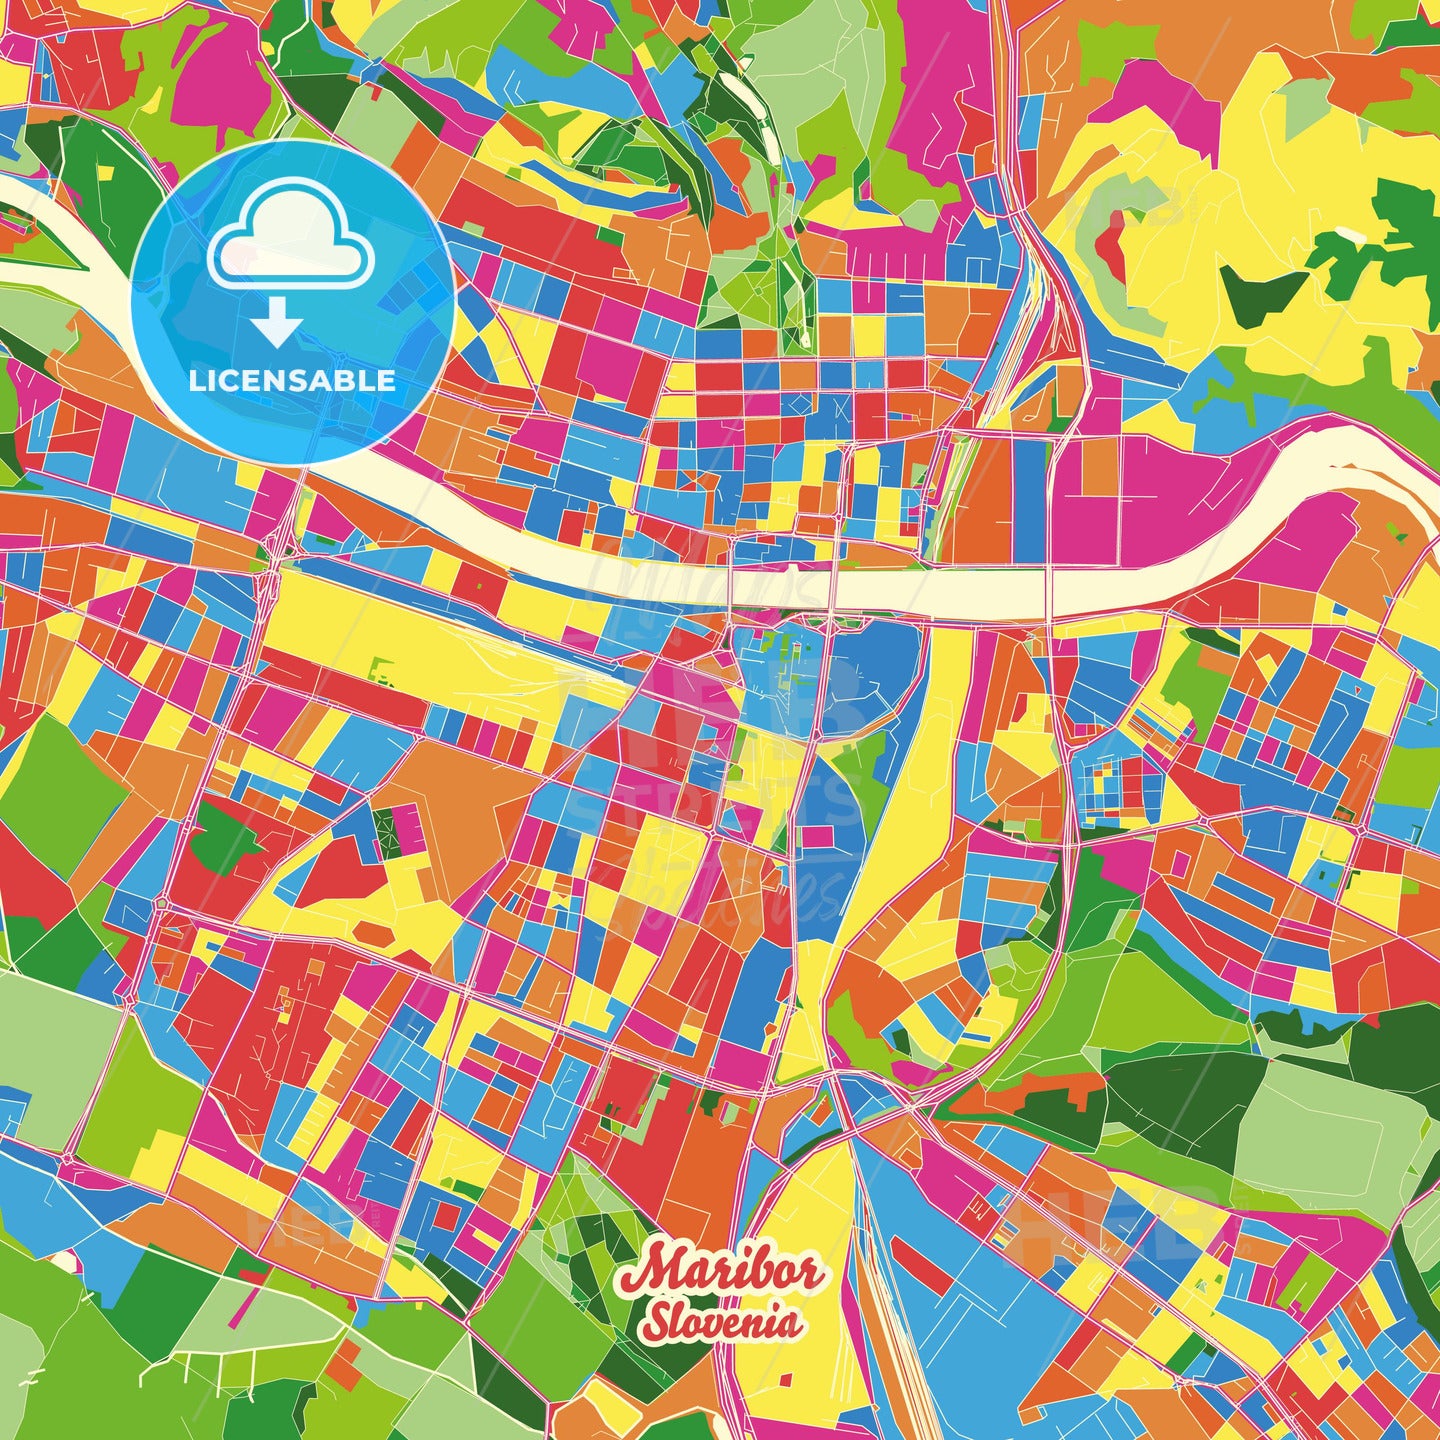 Maribor, Slovenia Crazy Colorful Street Map Poster Template - HEBSTREITS Sketches